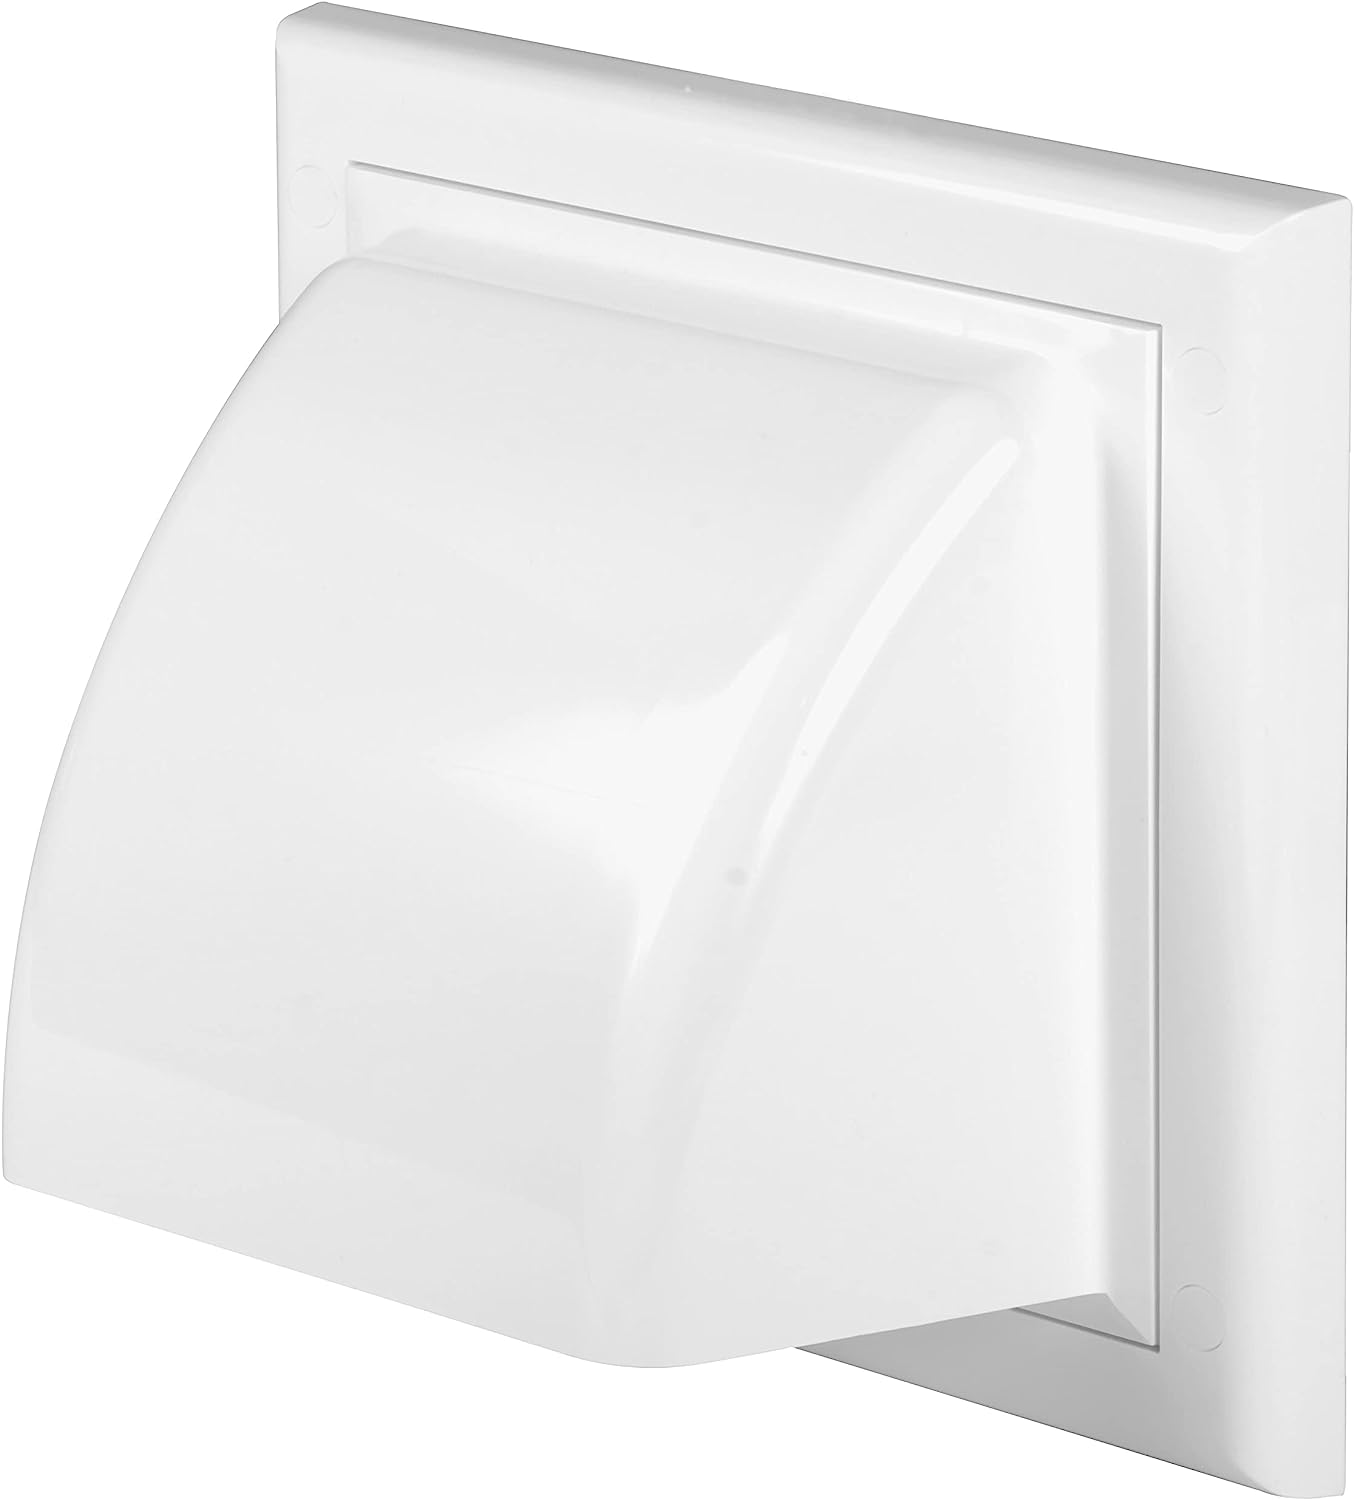 Awenta 4'' Inch Exhaust Hood Vent with Rain Cover, [...]